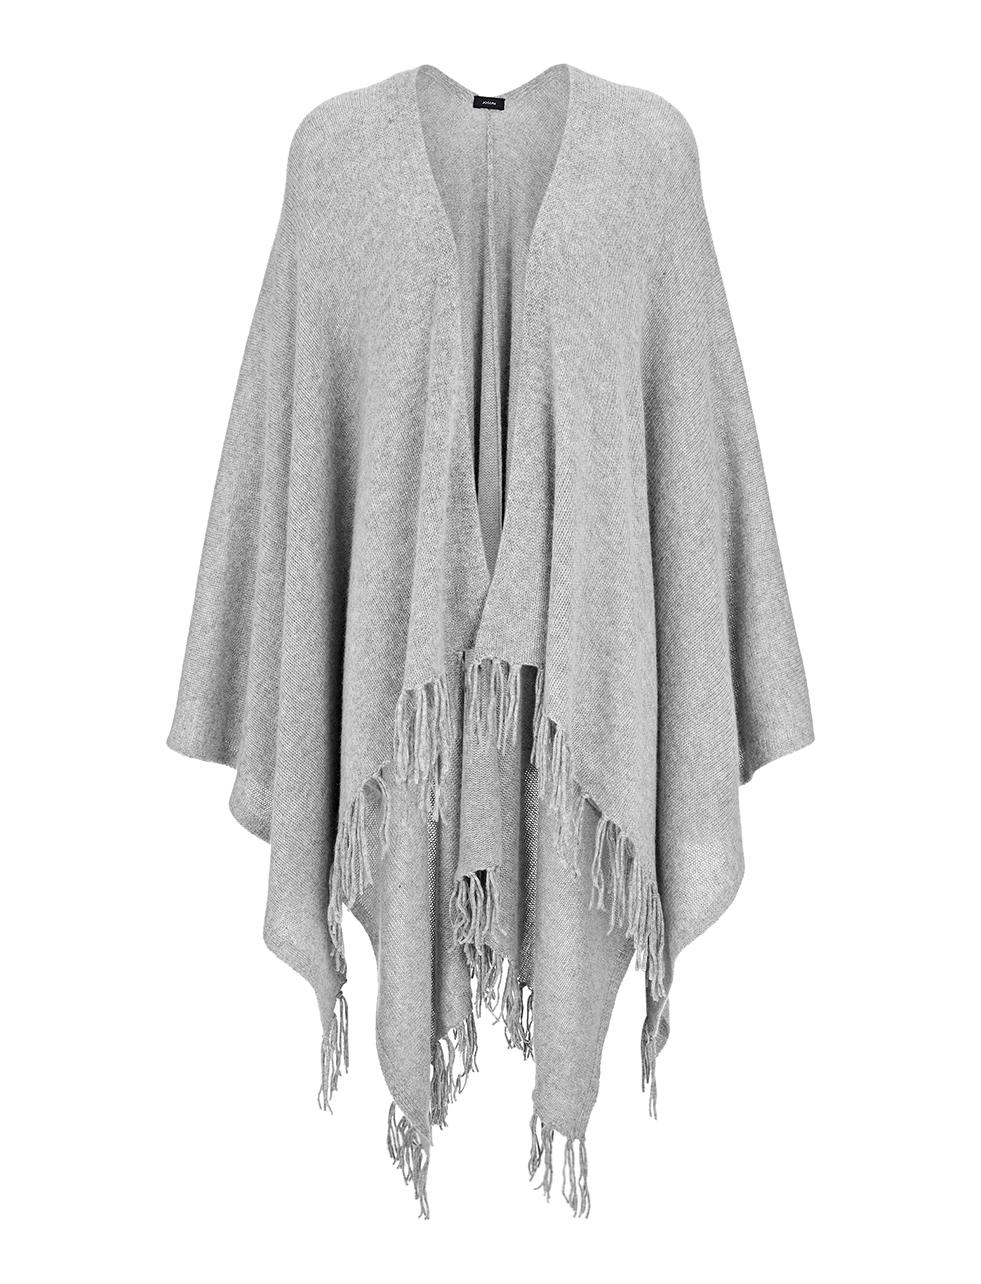 Joseph Spring Cashmere Poncho in Gray | Lyst